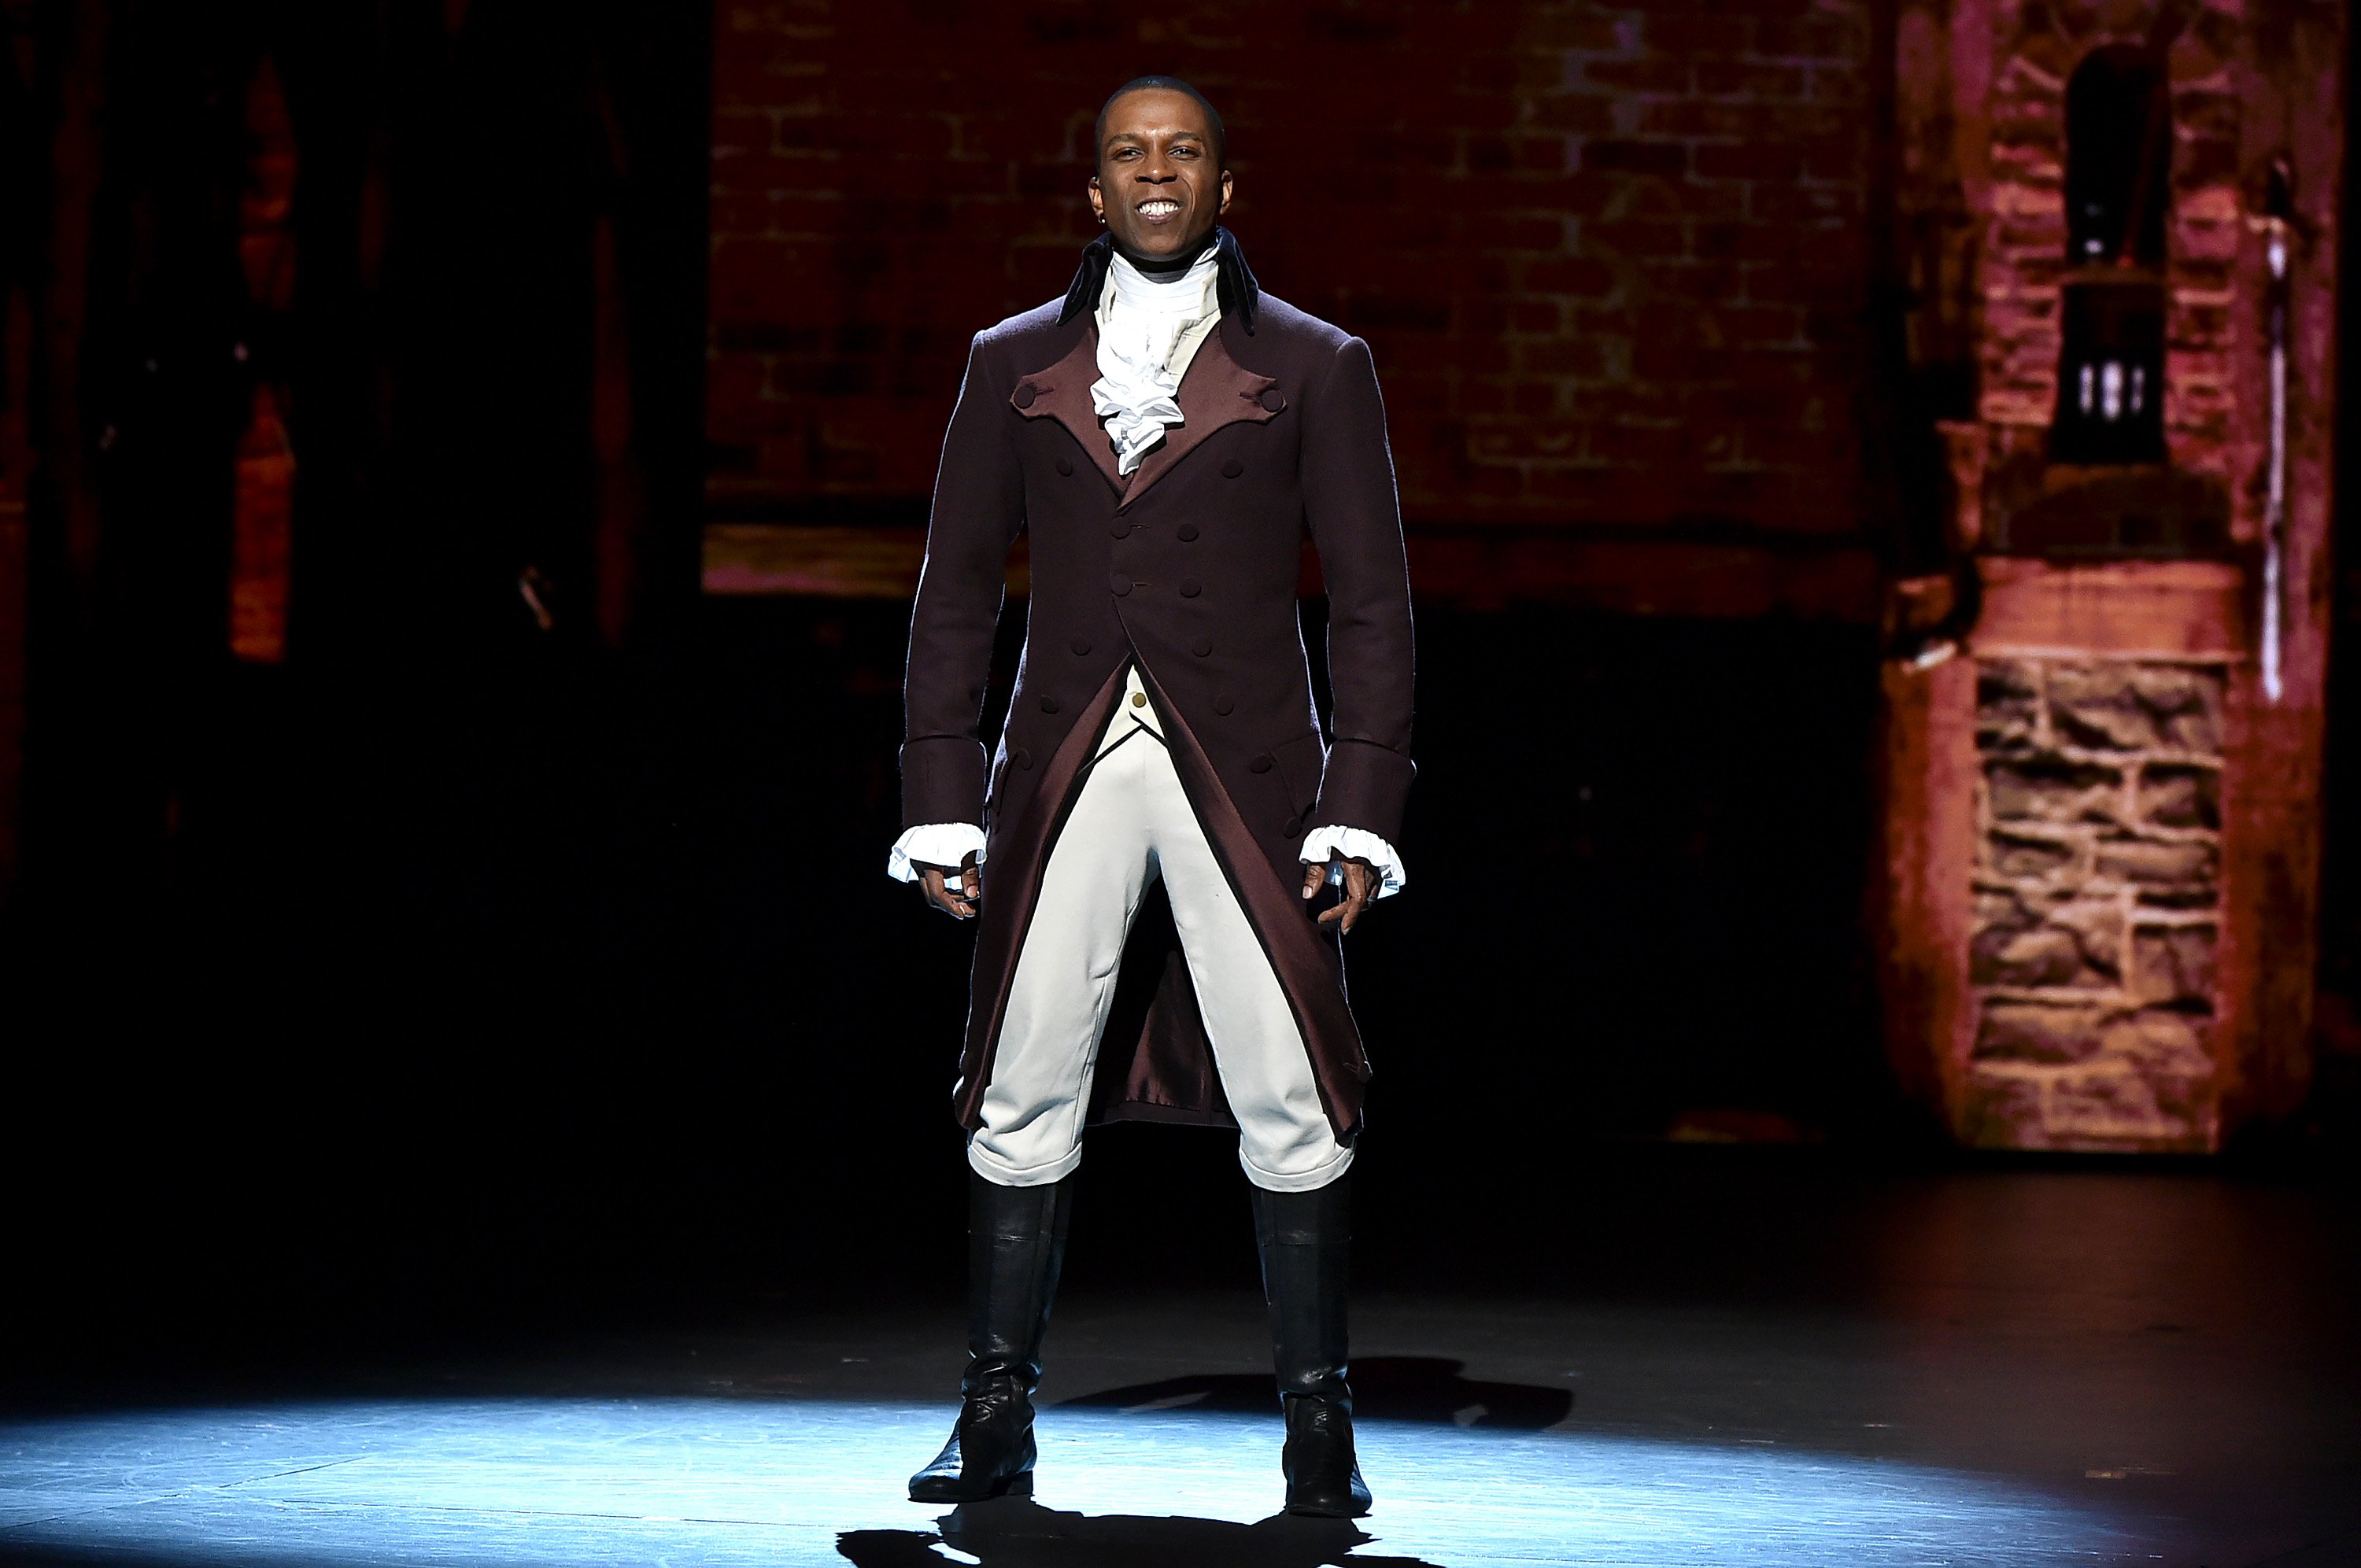 Leslie Odom Jr. onstage during the 70th Annual Tony Awards at The Beacon Theatre on June 12, 2016 in New York City